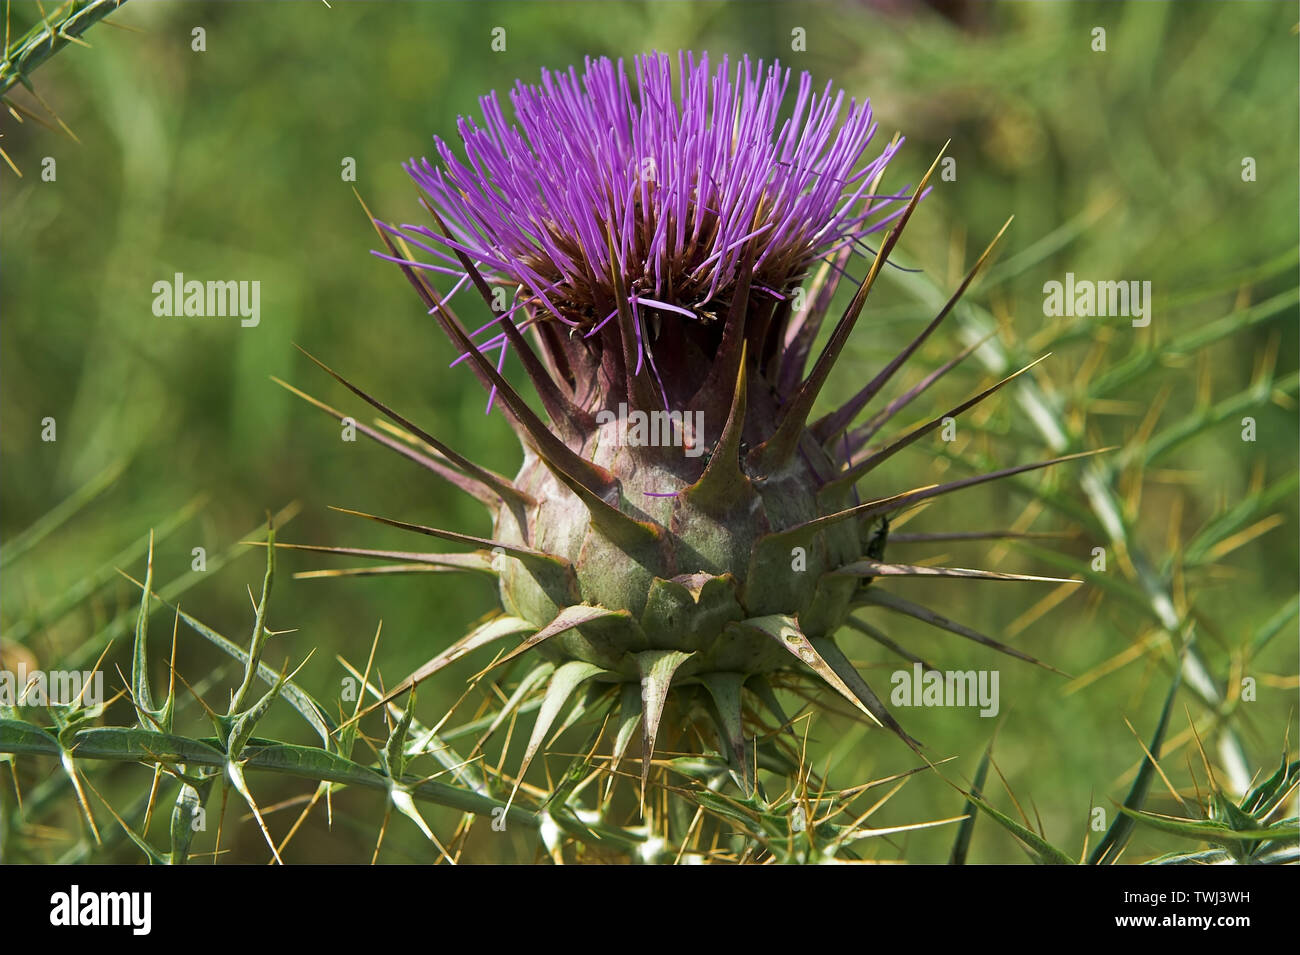 Carduus L. Oset, Ringdisteln, A prickly plant in closeup, Eine stachelige  Pflanze in Nahaufnahme, Spikes and needles, Spikes und Nadeln. Macro, zoom  Stock Photo - Alamy